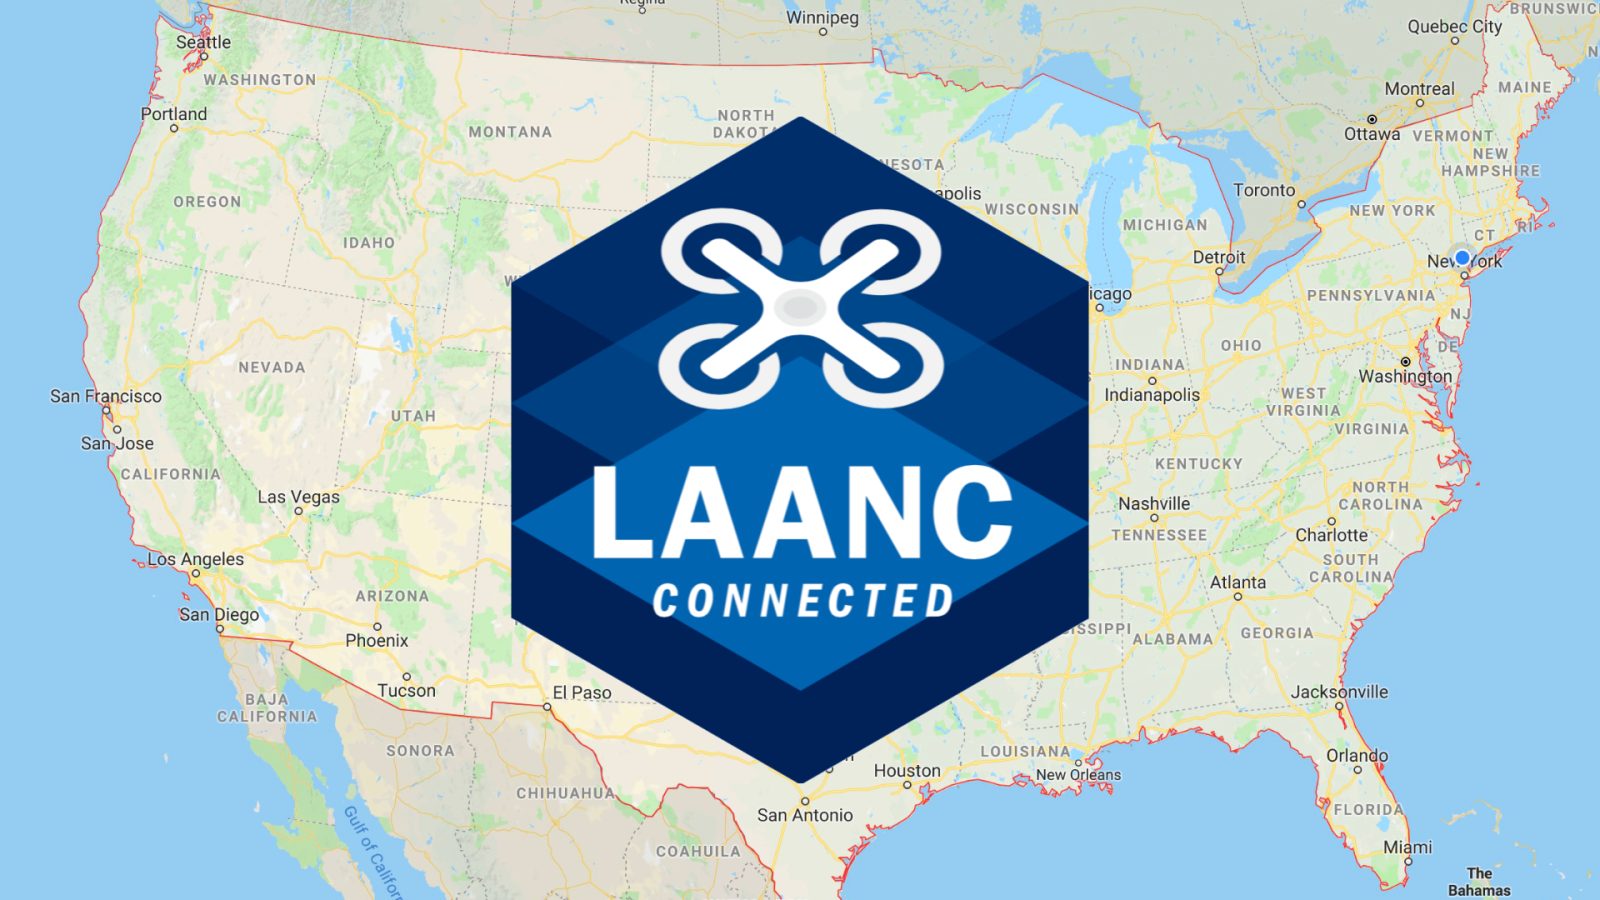 Hobbyist drone pilots will soon be required to use LAANC to fly in controlled airspace